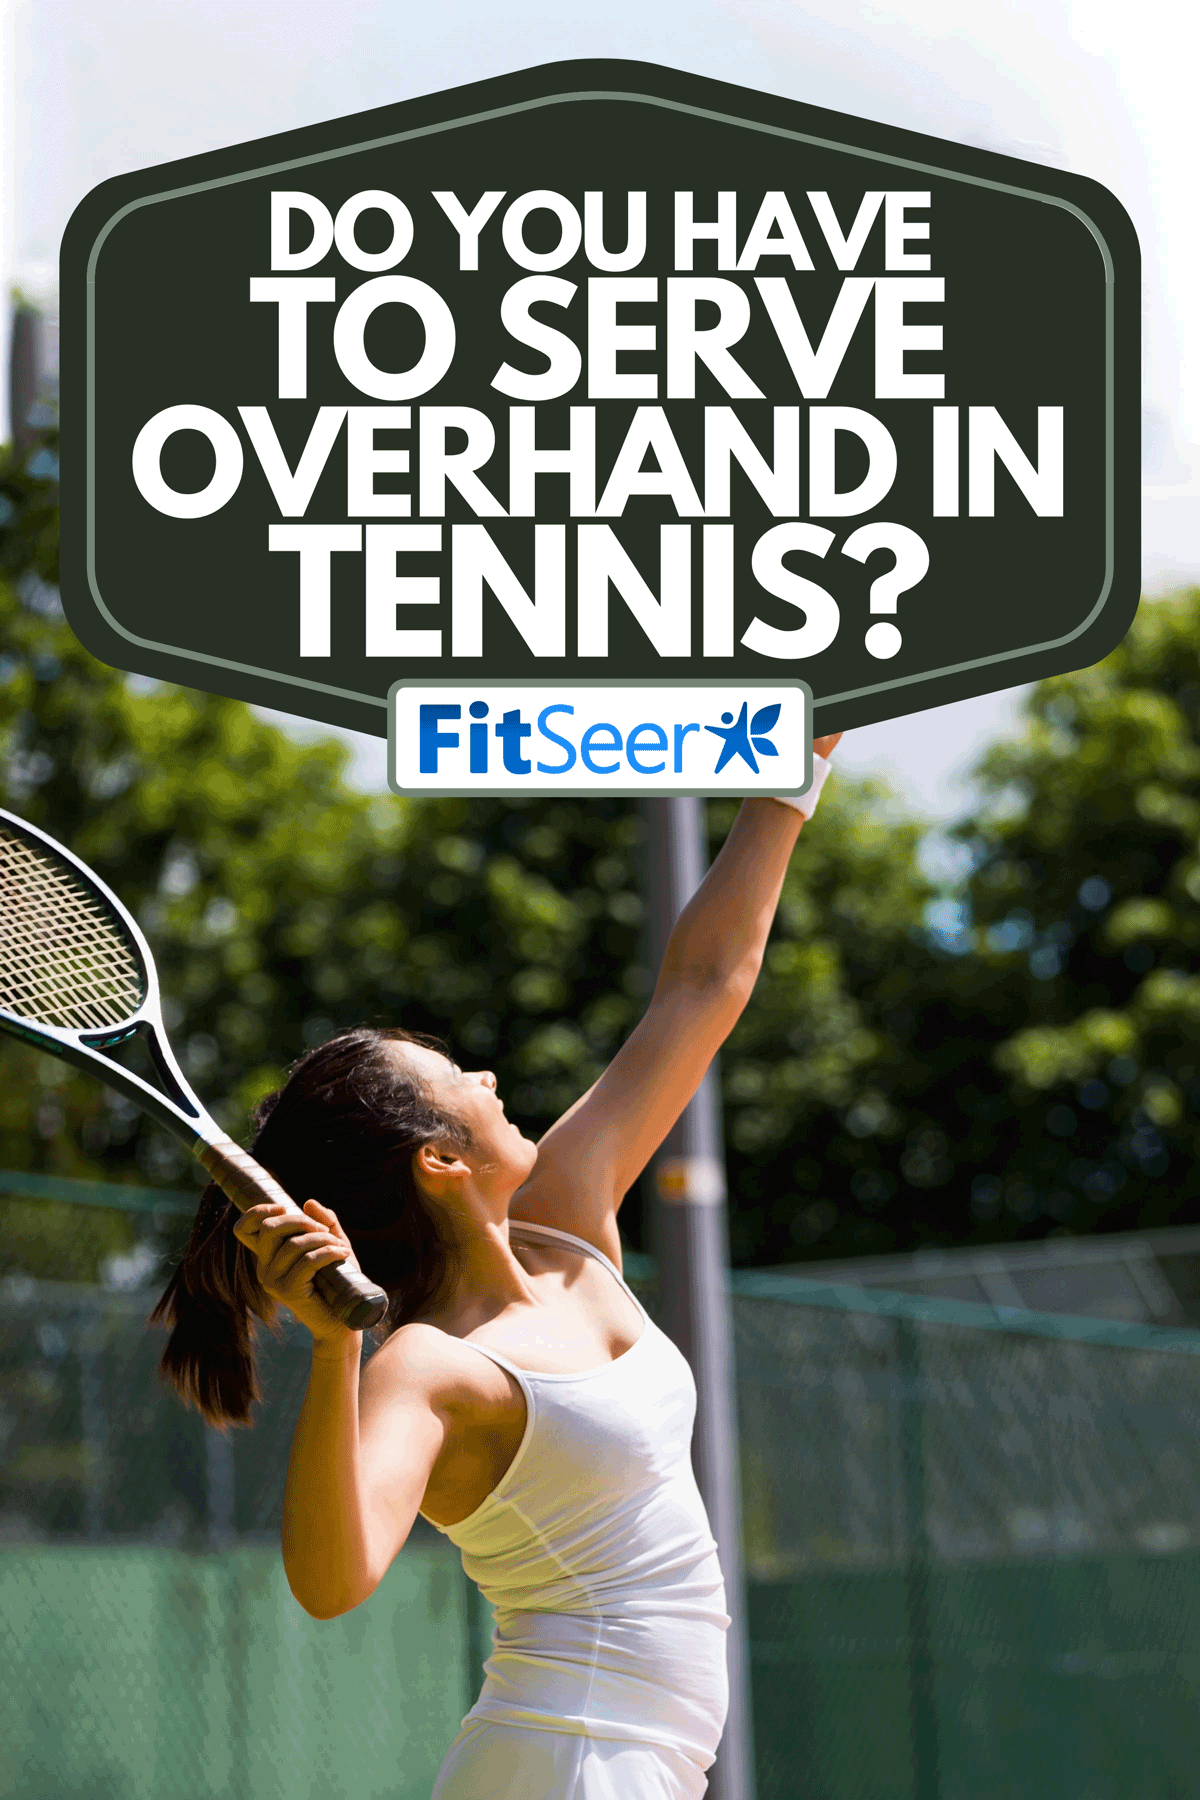 A pretty tennis player about to serve, Do You Have To Serve Overhand In Tennis?